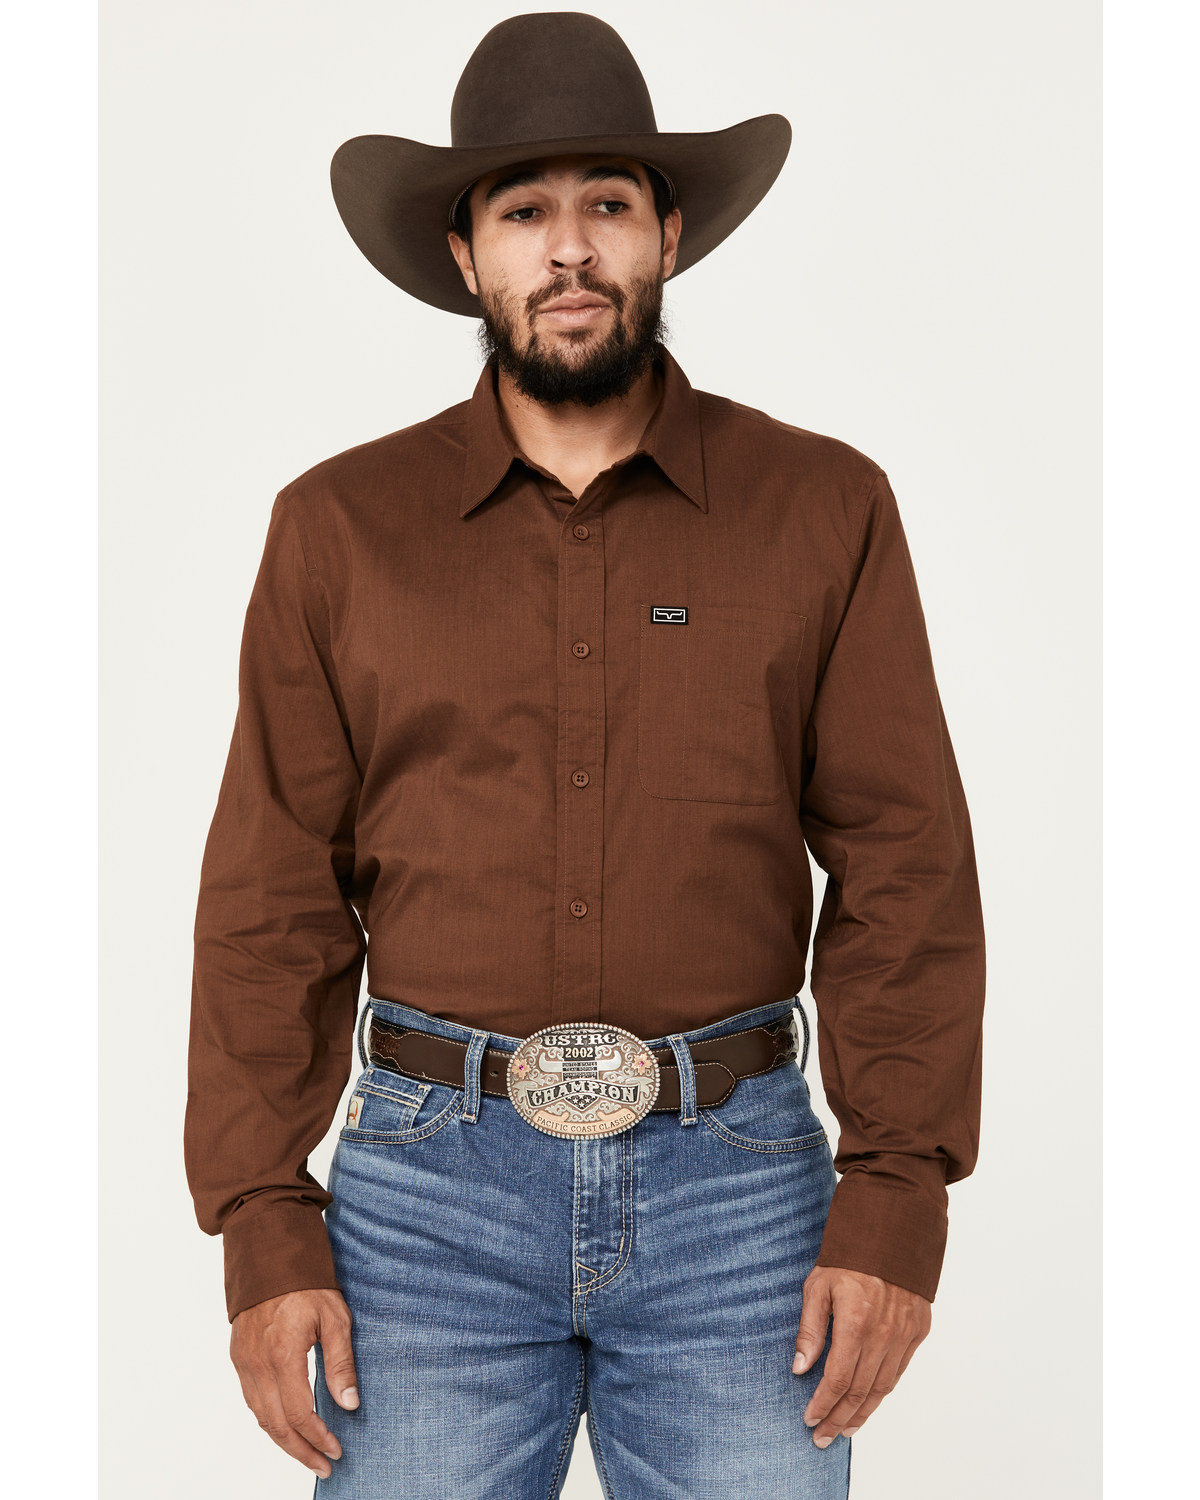 Kimes Ranch Men's Linville Long Sleeve Button-Down Performance Western Shirt